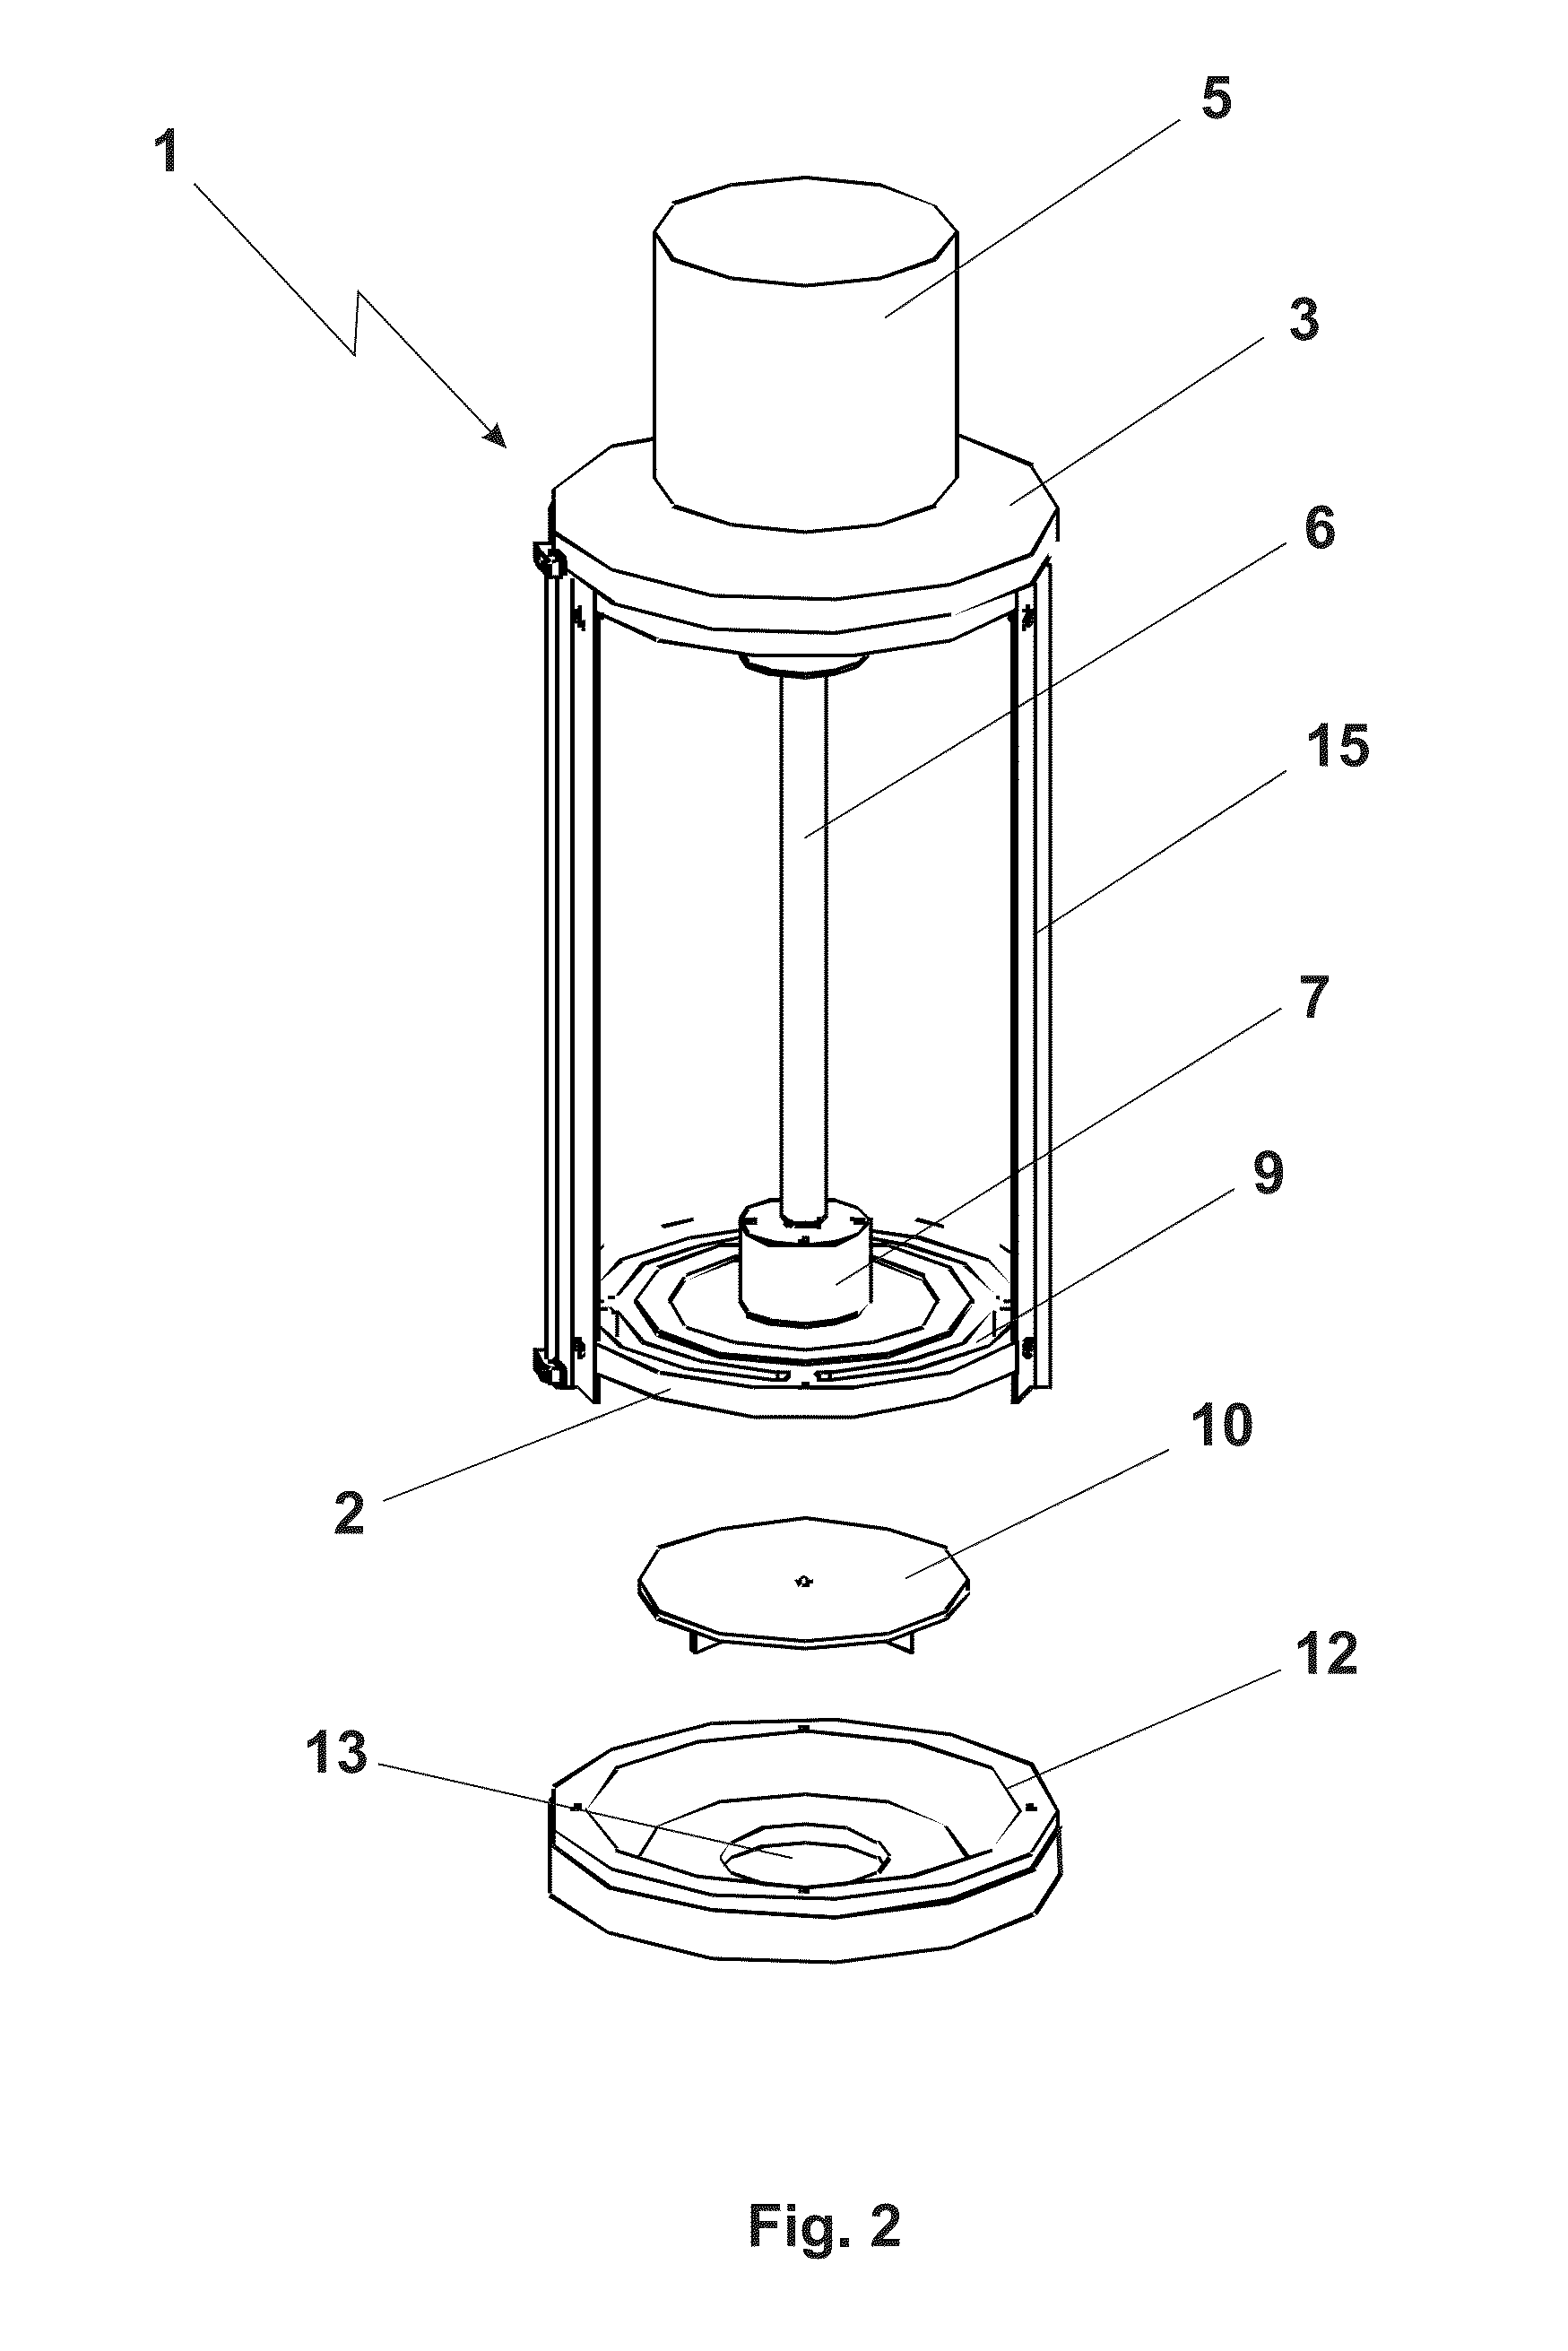 Filter for edible oil and fat